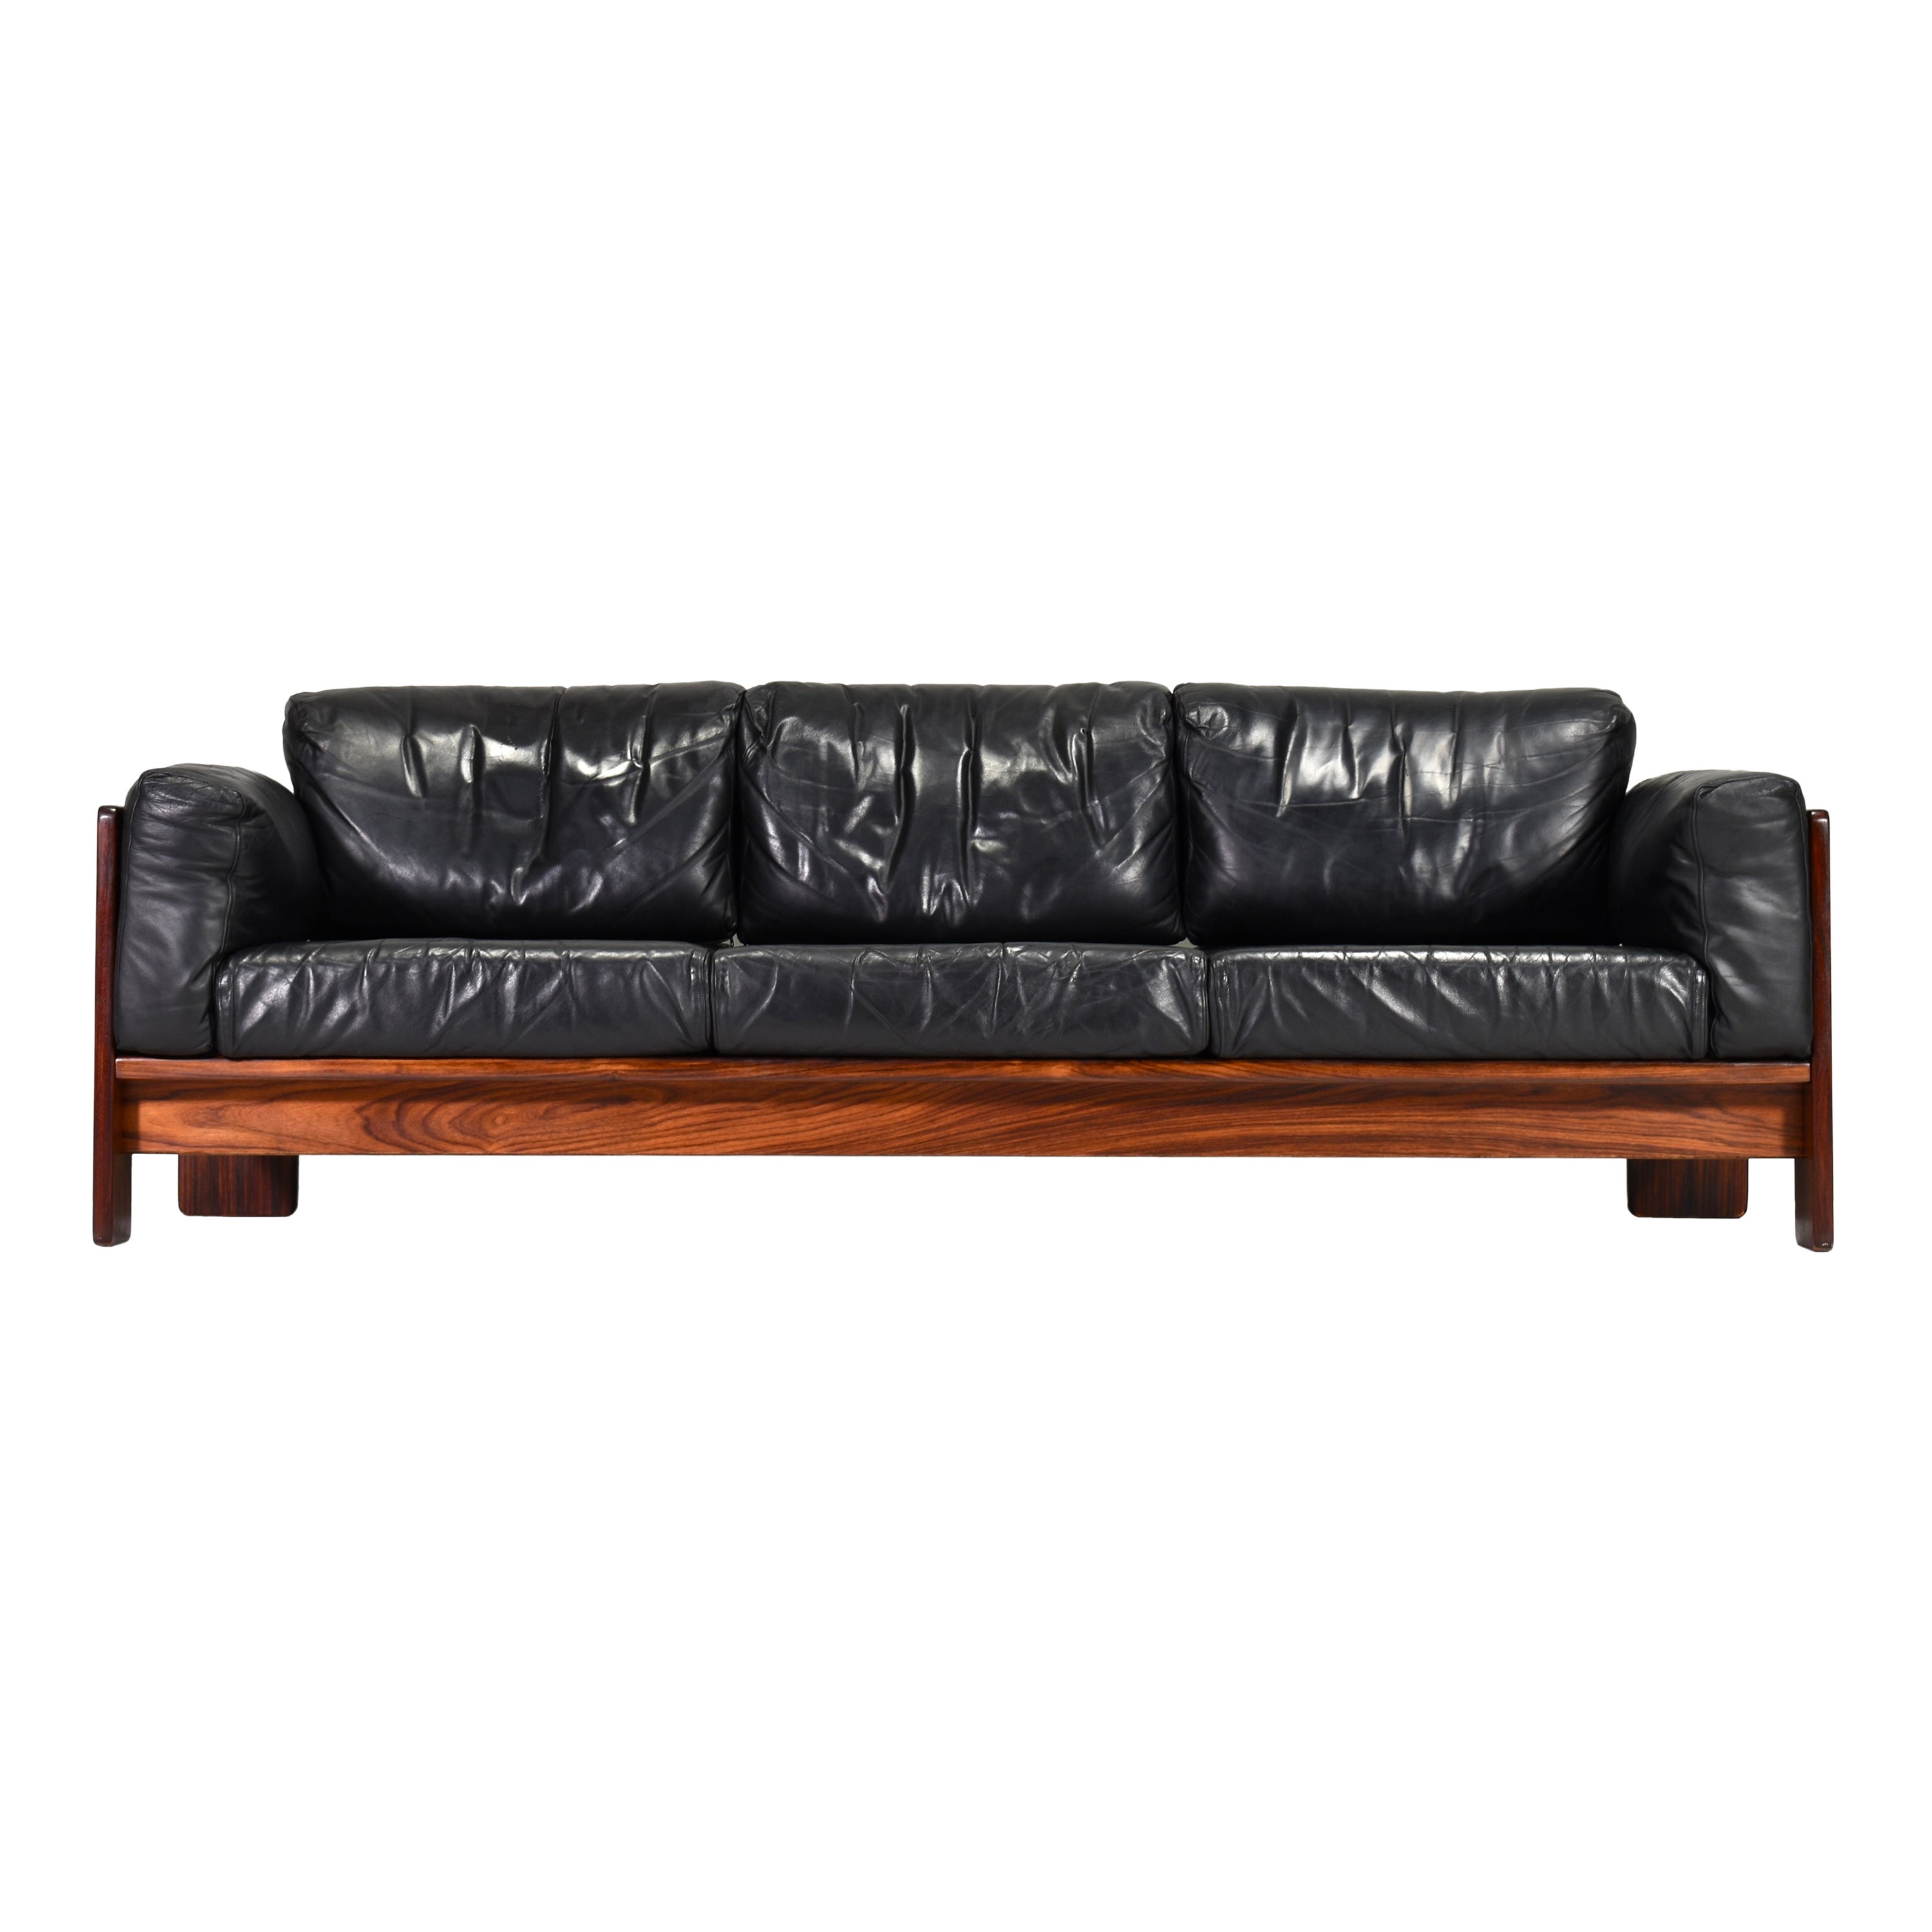 BASTIANO Sofa in black leather by Afra and Tobia Scarpa for KNOLL – Italy, 1962 For Sale